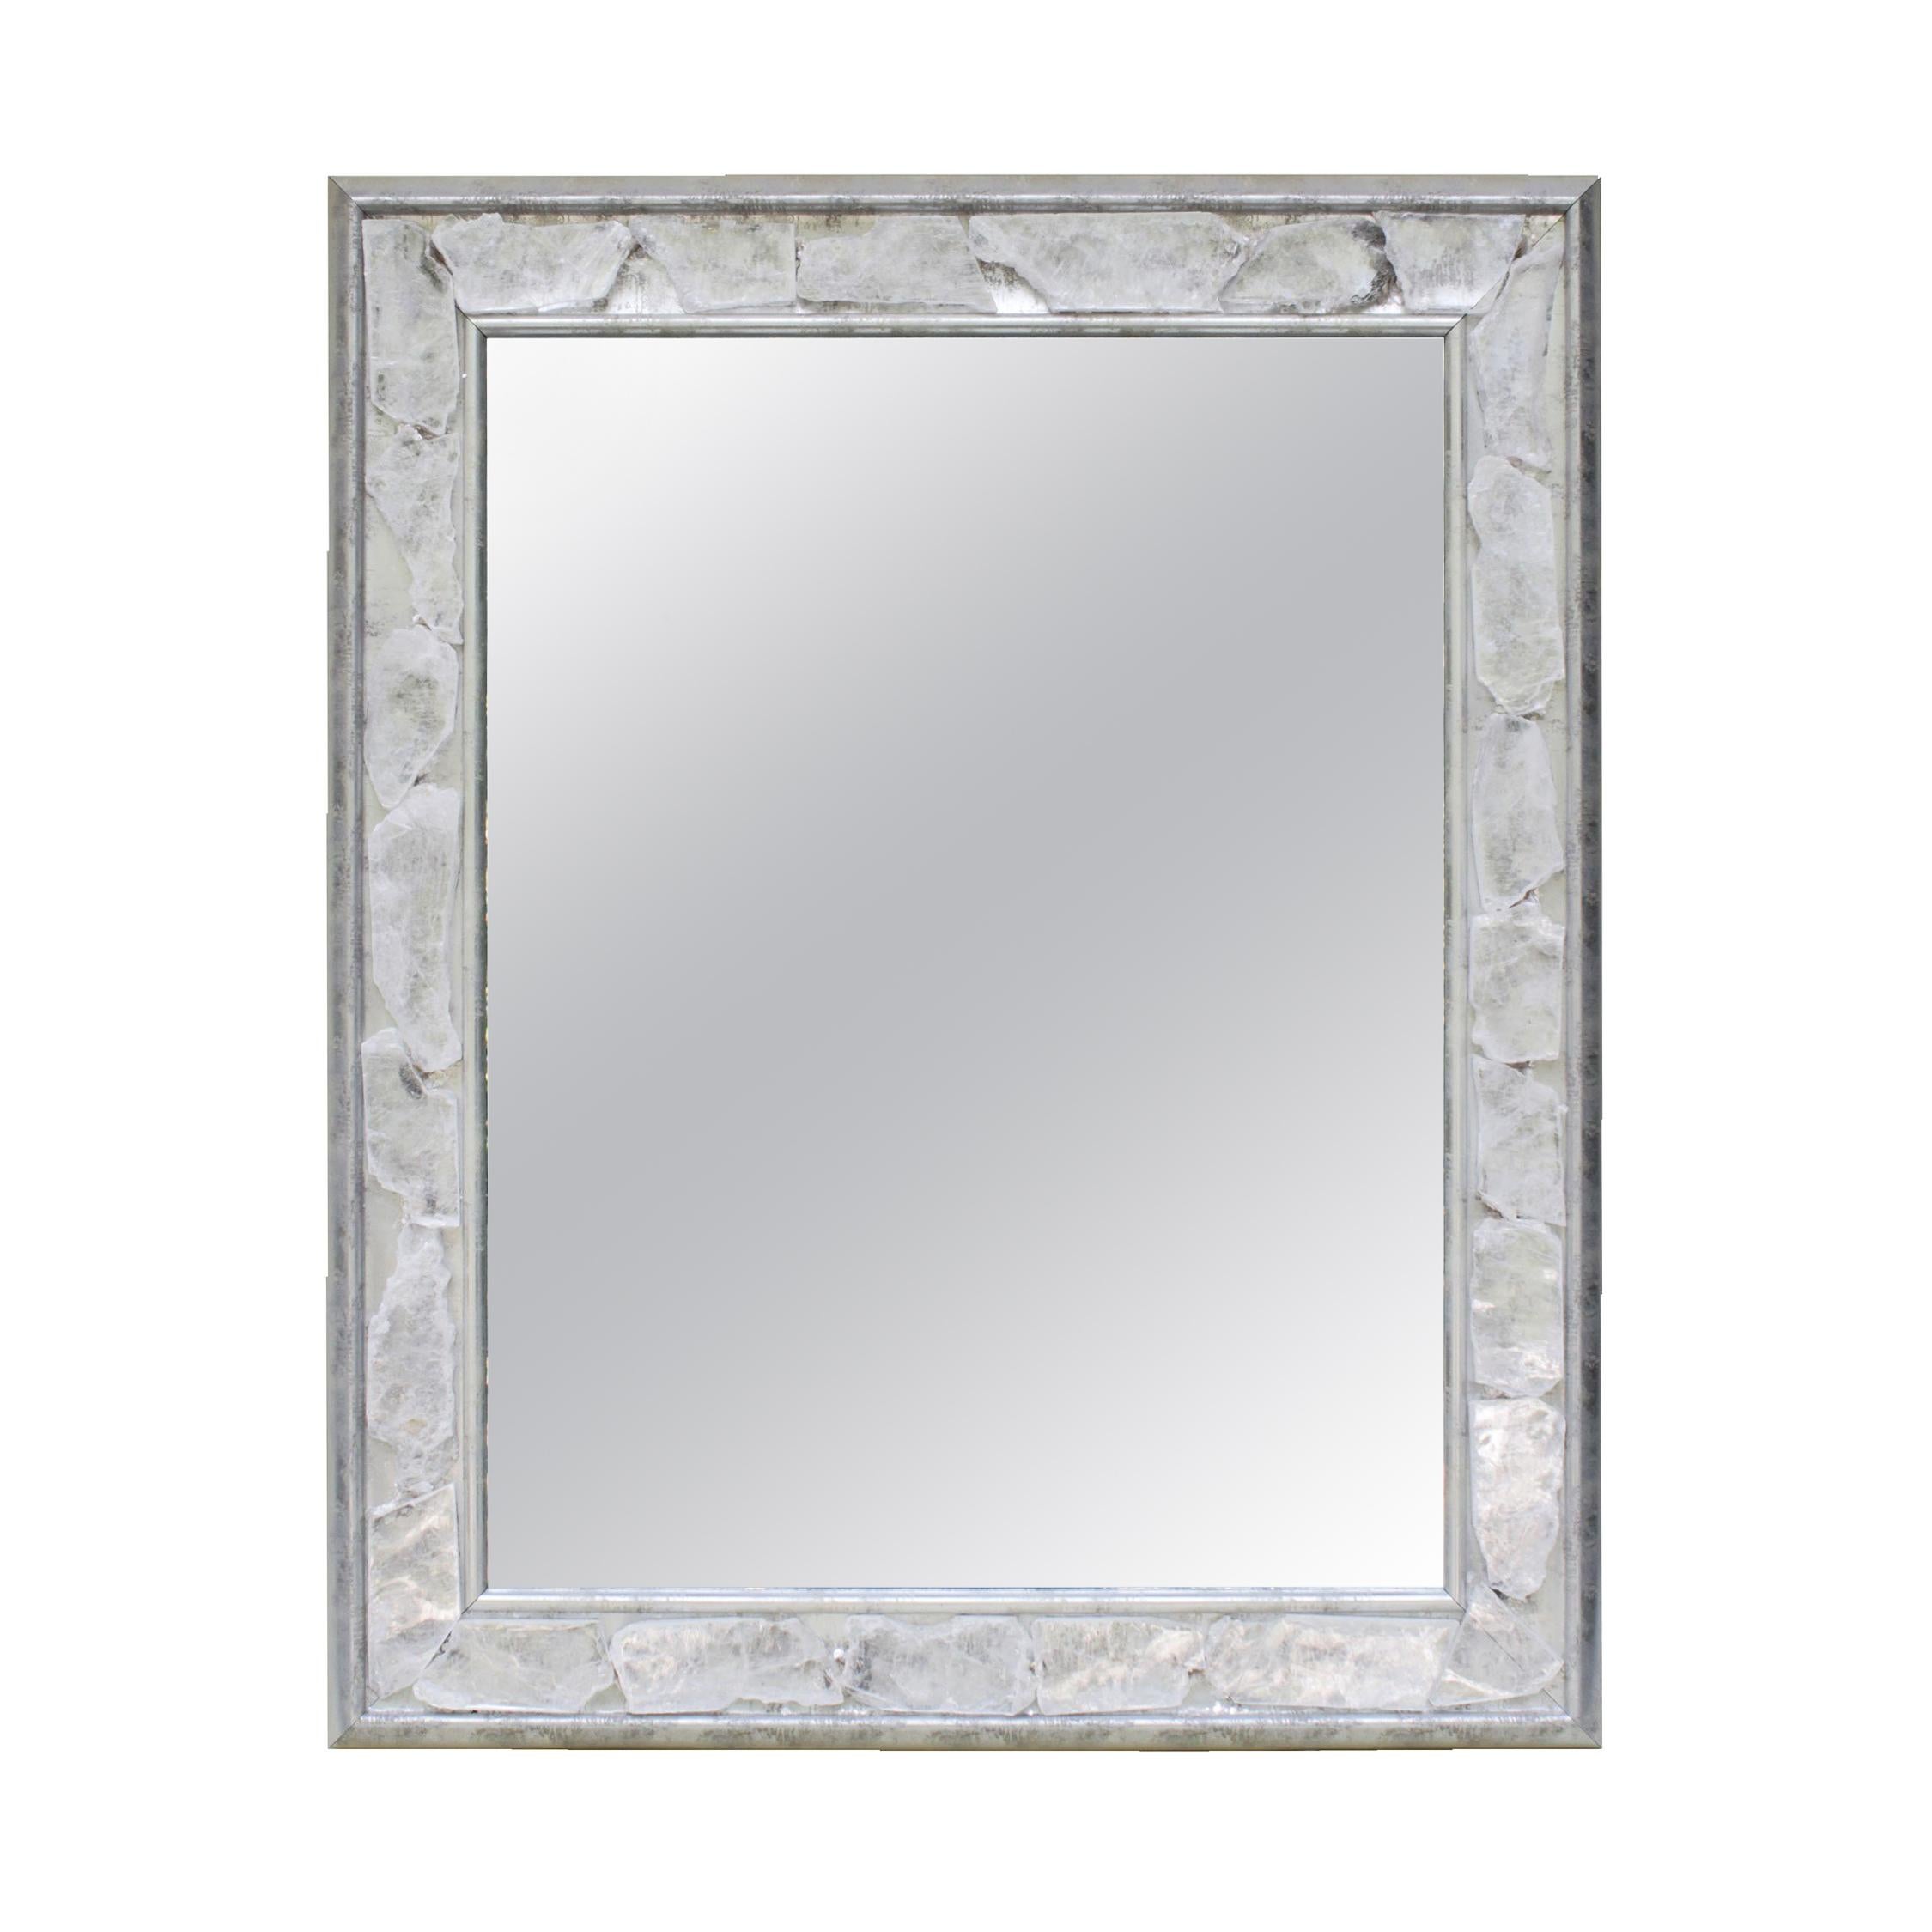 Silver Patina Wall Mirror Decorated with Calcite Slices